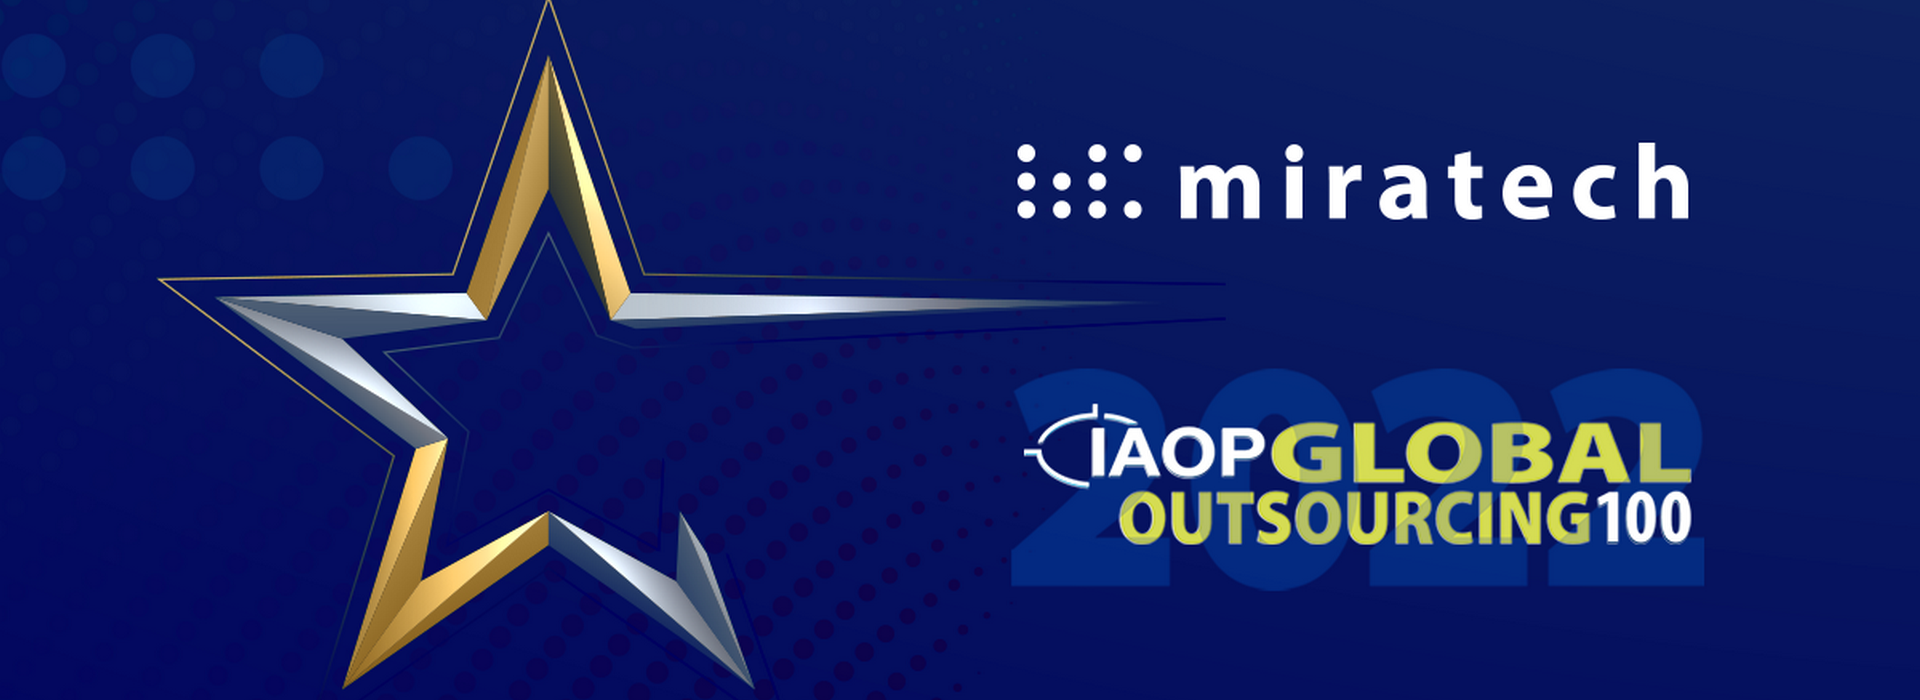 Miratech’s 10th Year as ‘Rising Star’ on 2022 Global Outsourcing 100 List by IAOP